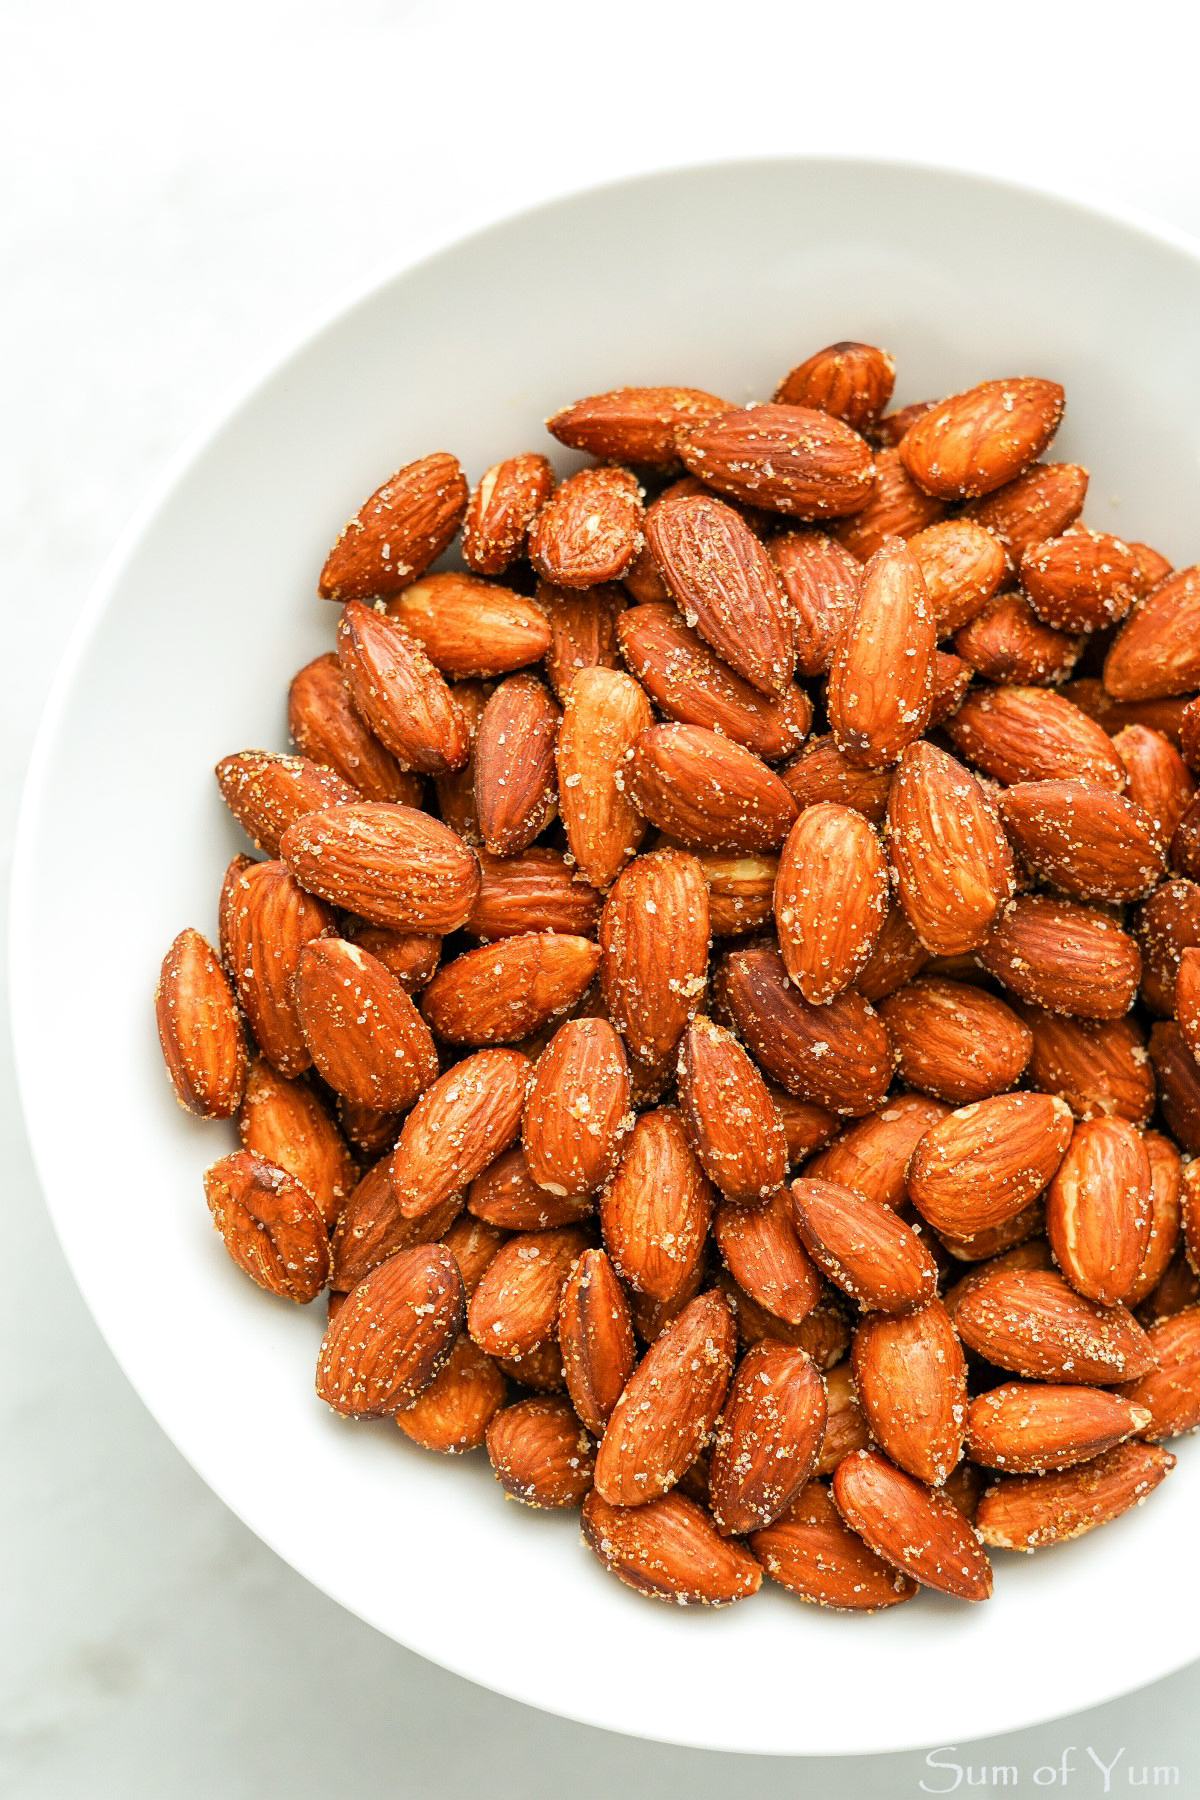 Bowl of Roasted Almonds 